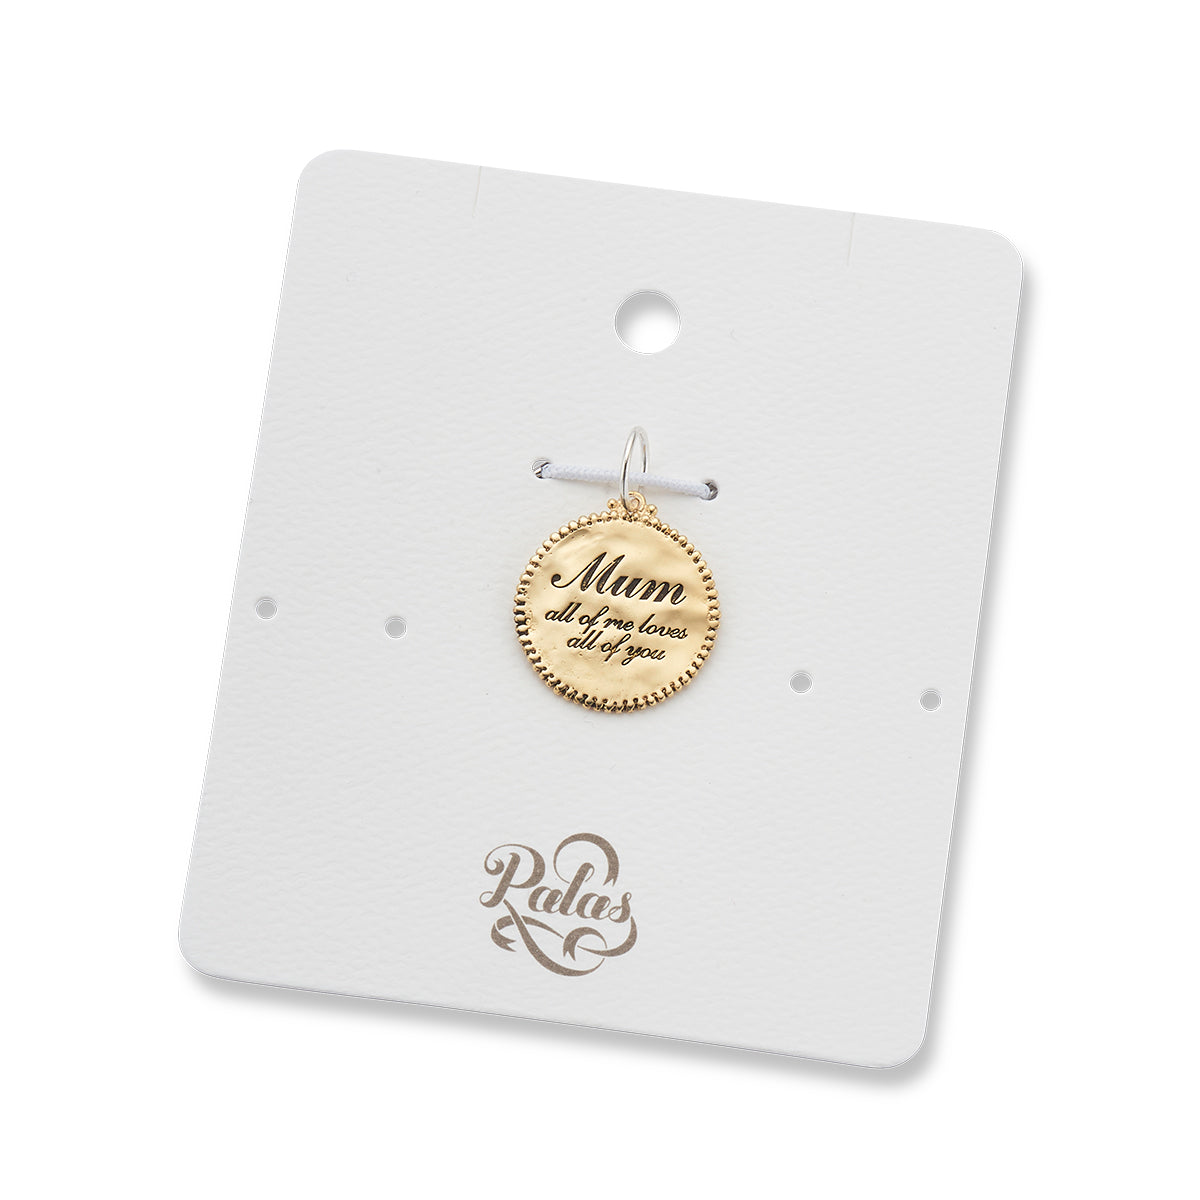 'Mum all of me loves all of you' charm